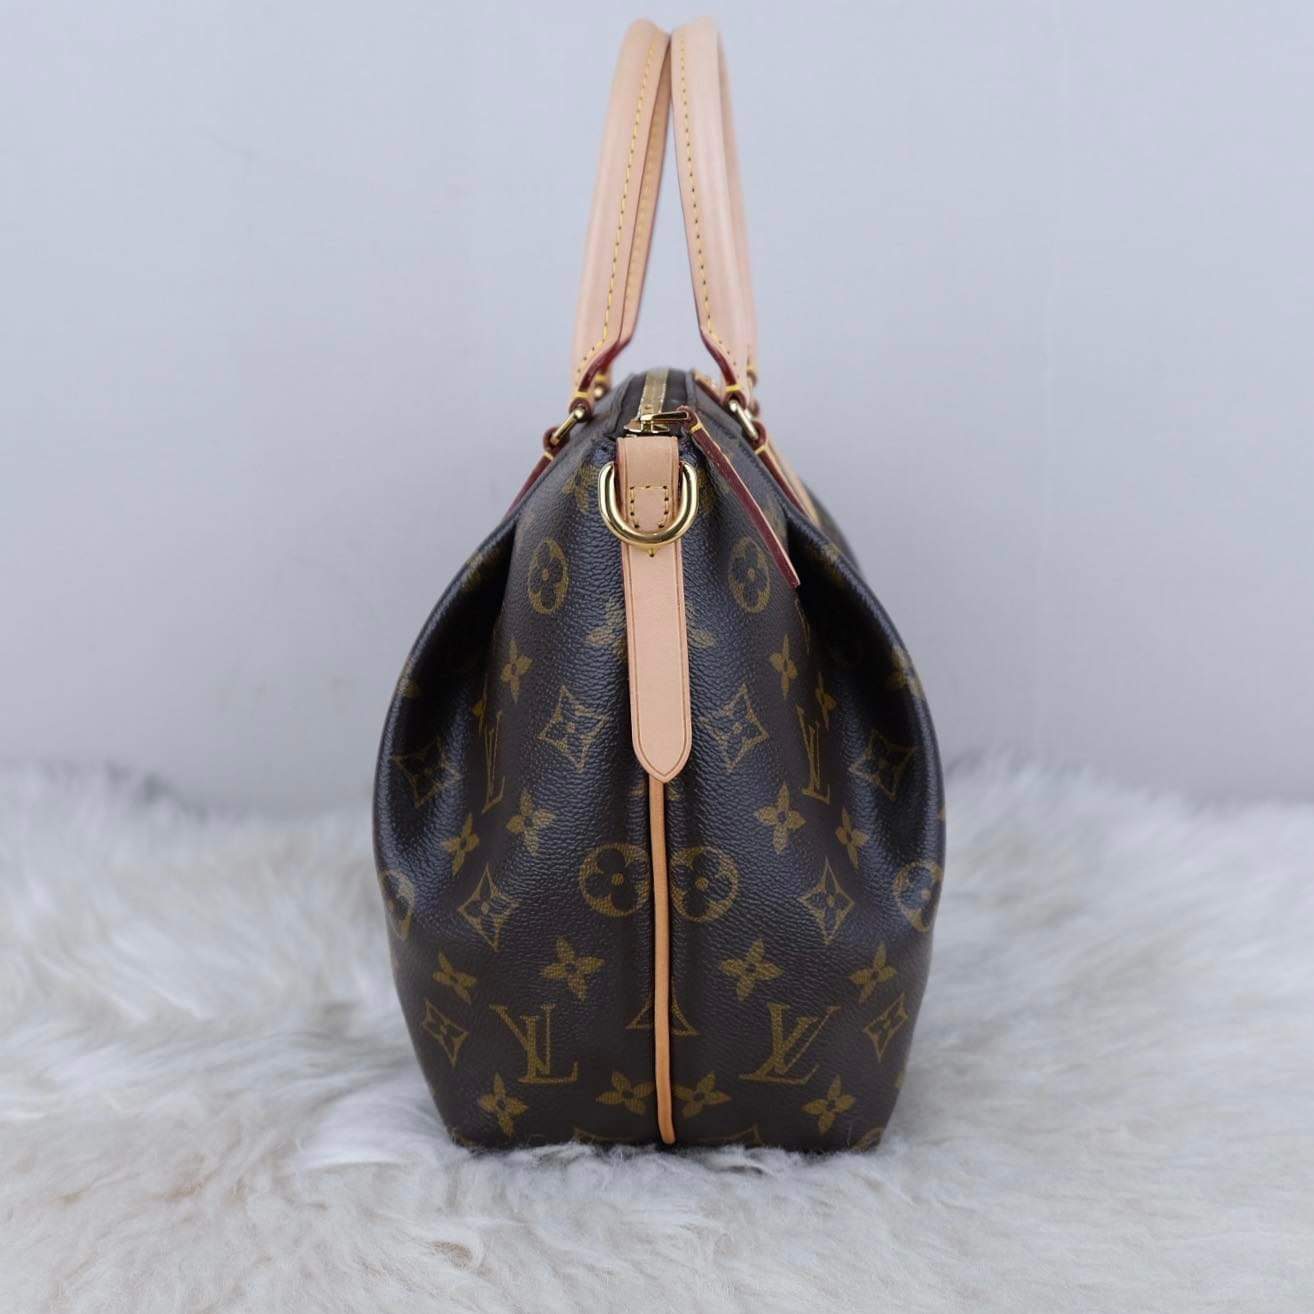 Louis Vuitton Turenne PM Monogram Crossbody or Satchel - A World Of Goods  For You, LLC